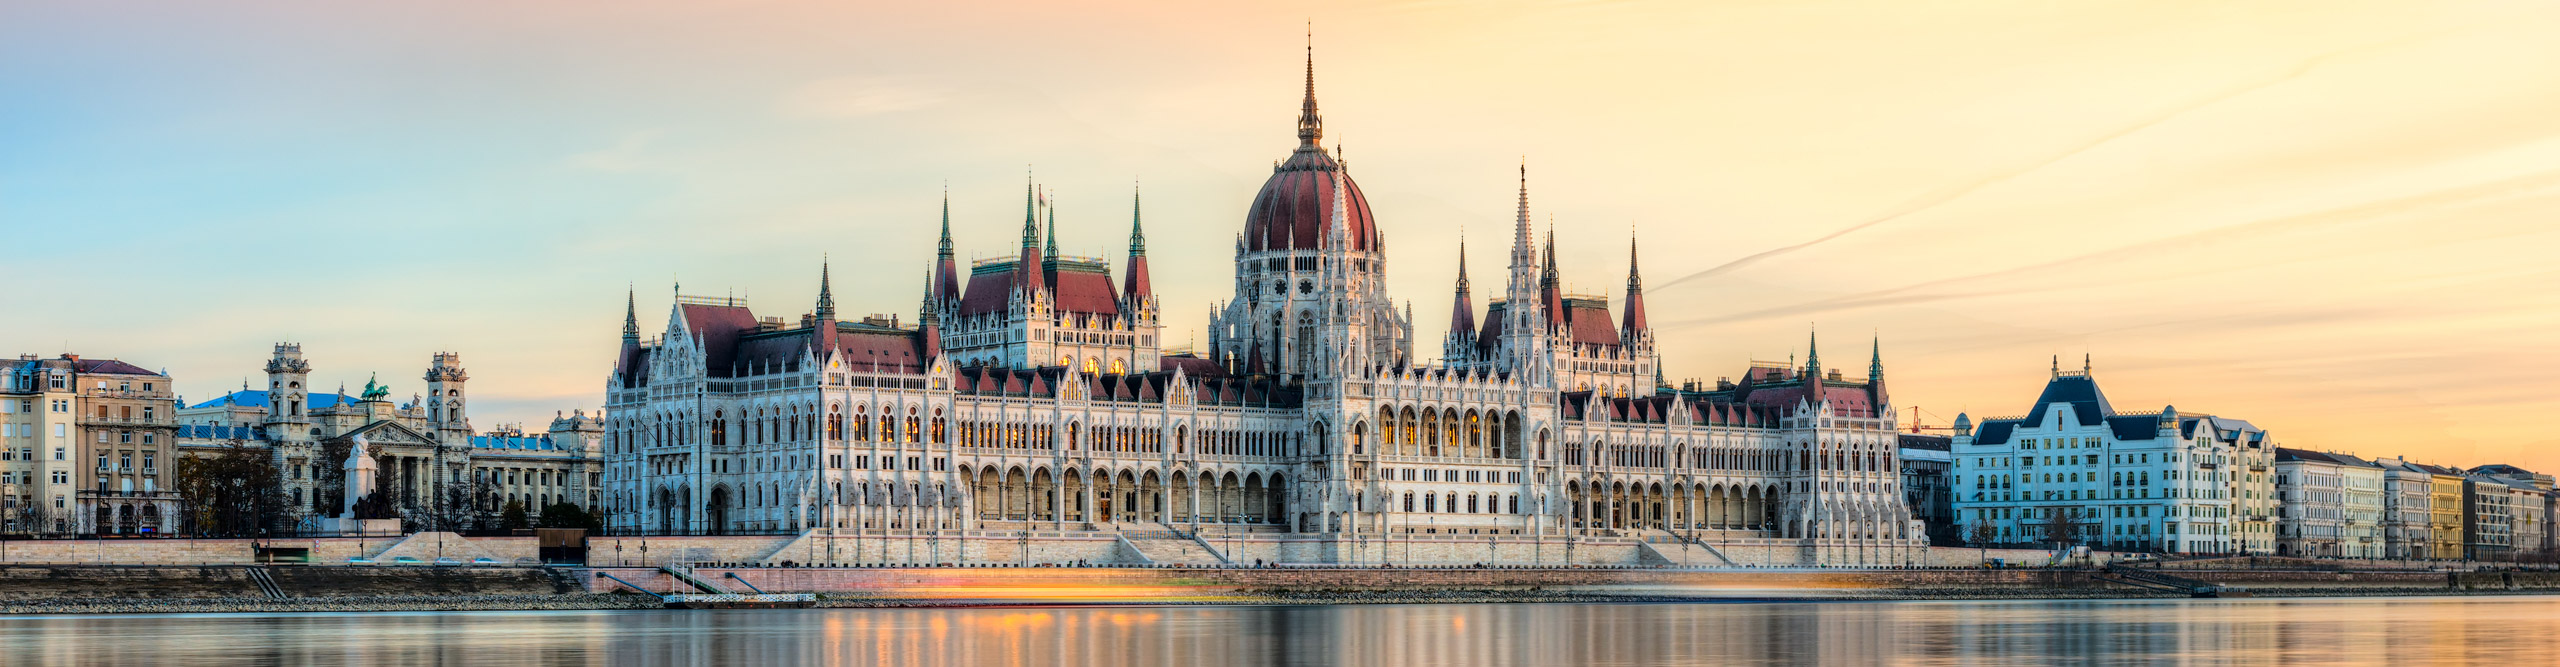 Sunset over the Parliament building in Budapest, Hungary